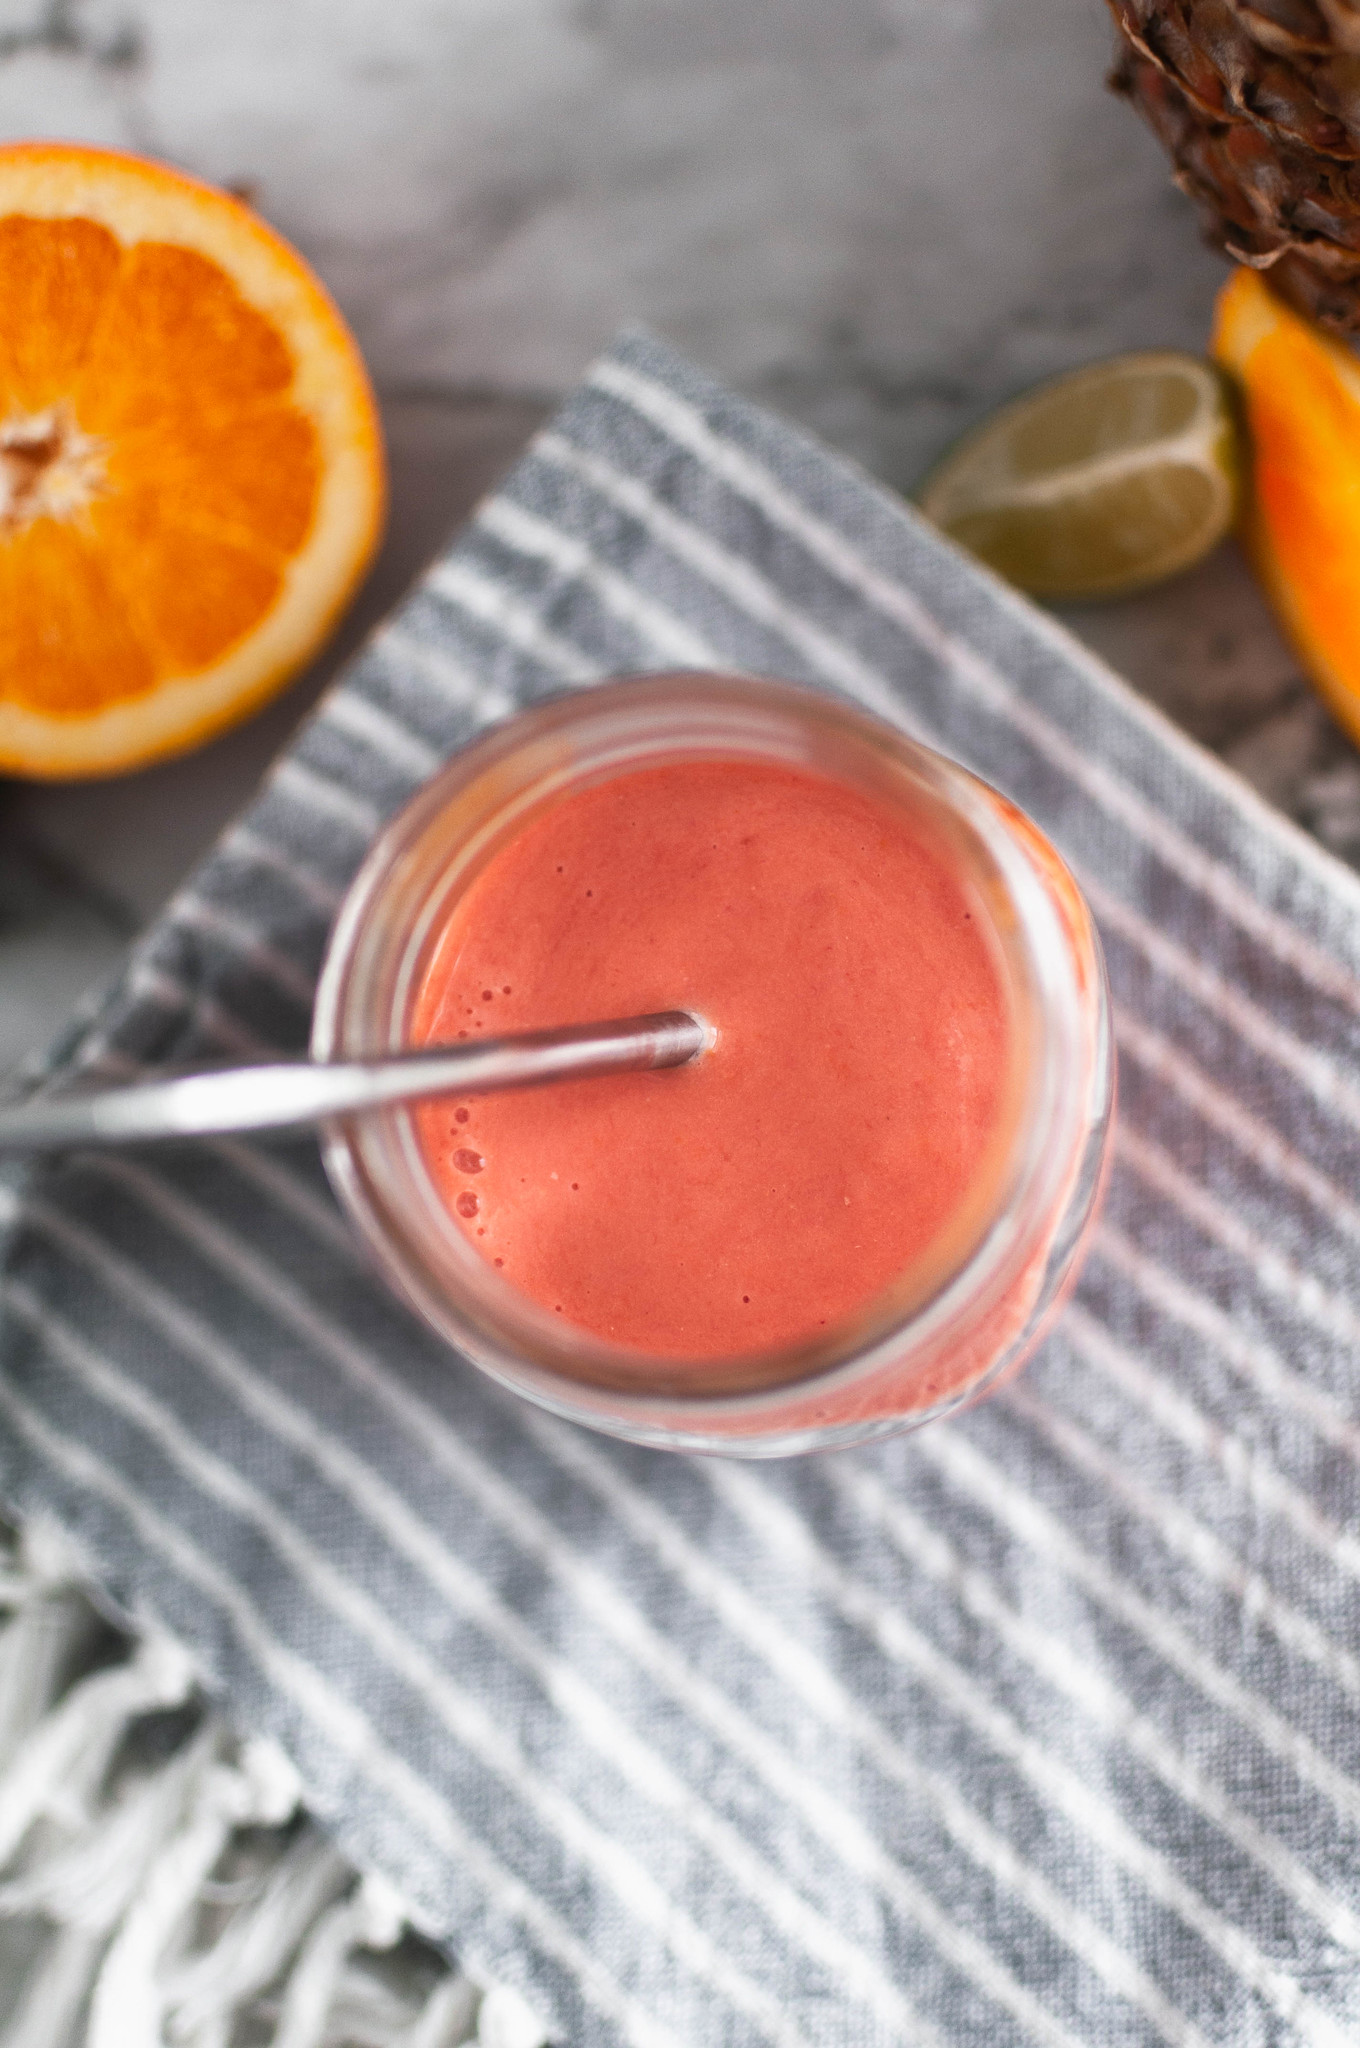 Get all the flavors of rainbow sherbet without all the sugar with this Rainbow Sherbet Smoothie. Fresh orange, lime juice, frozen raspberries and pineapple along with raspberry Greek yogurt all come together to make this incredibly fruity, healthy smoothie.